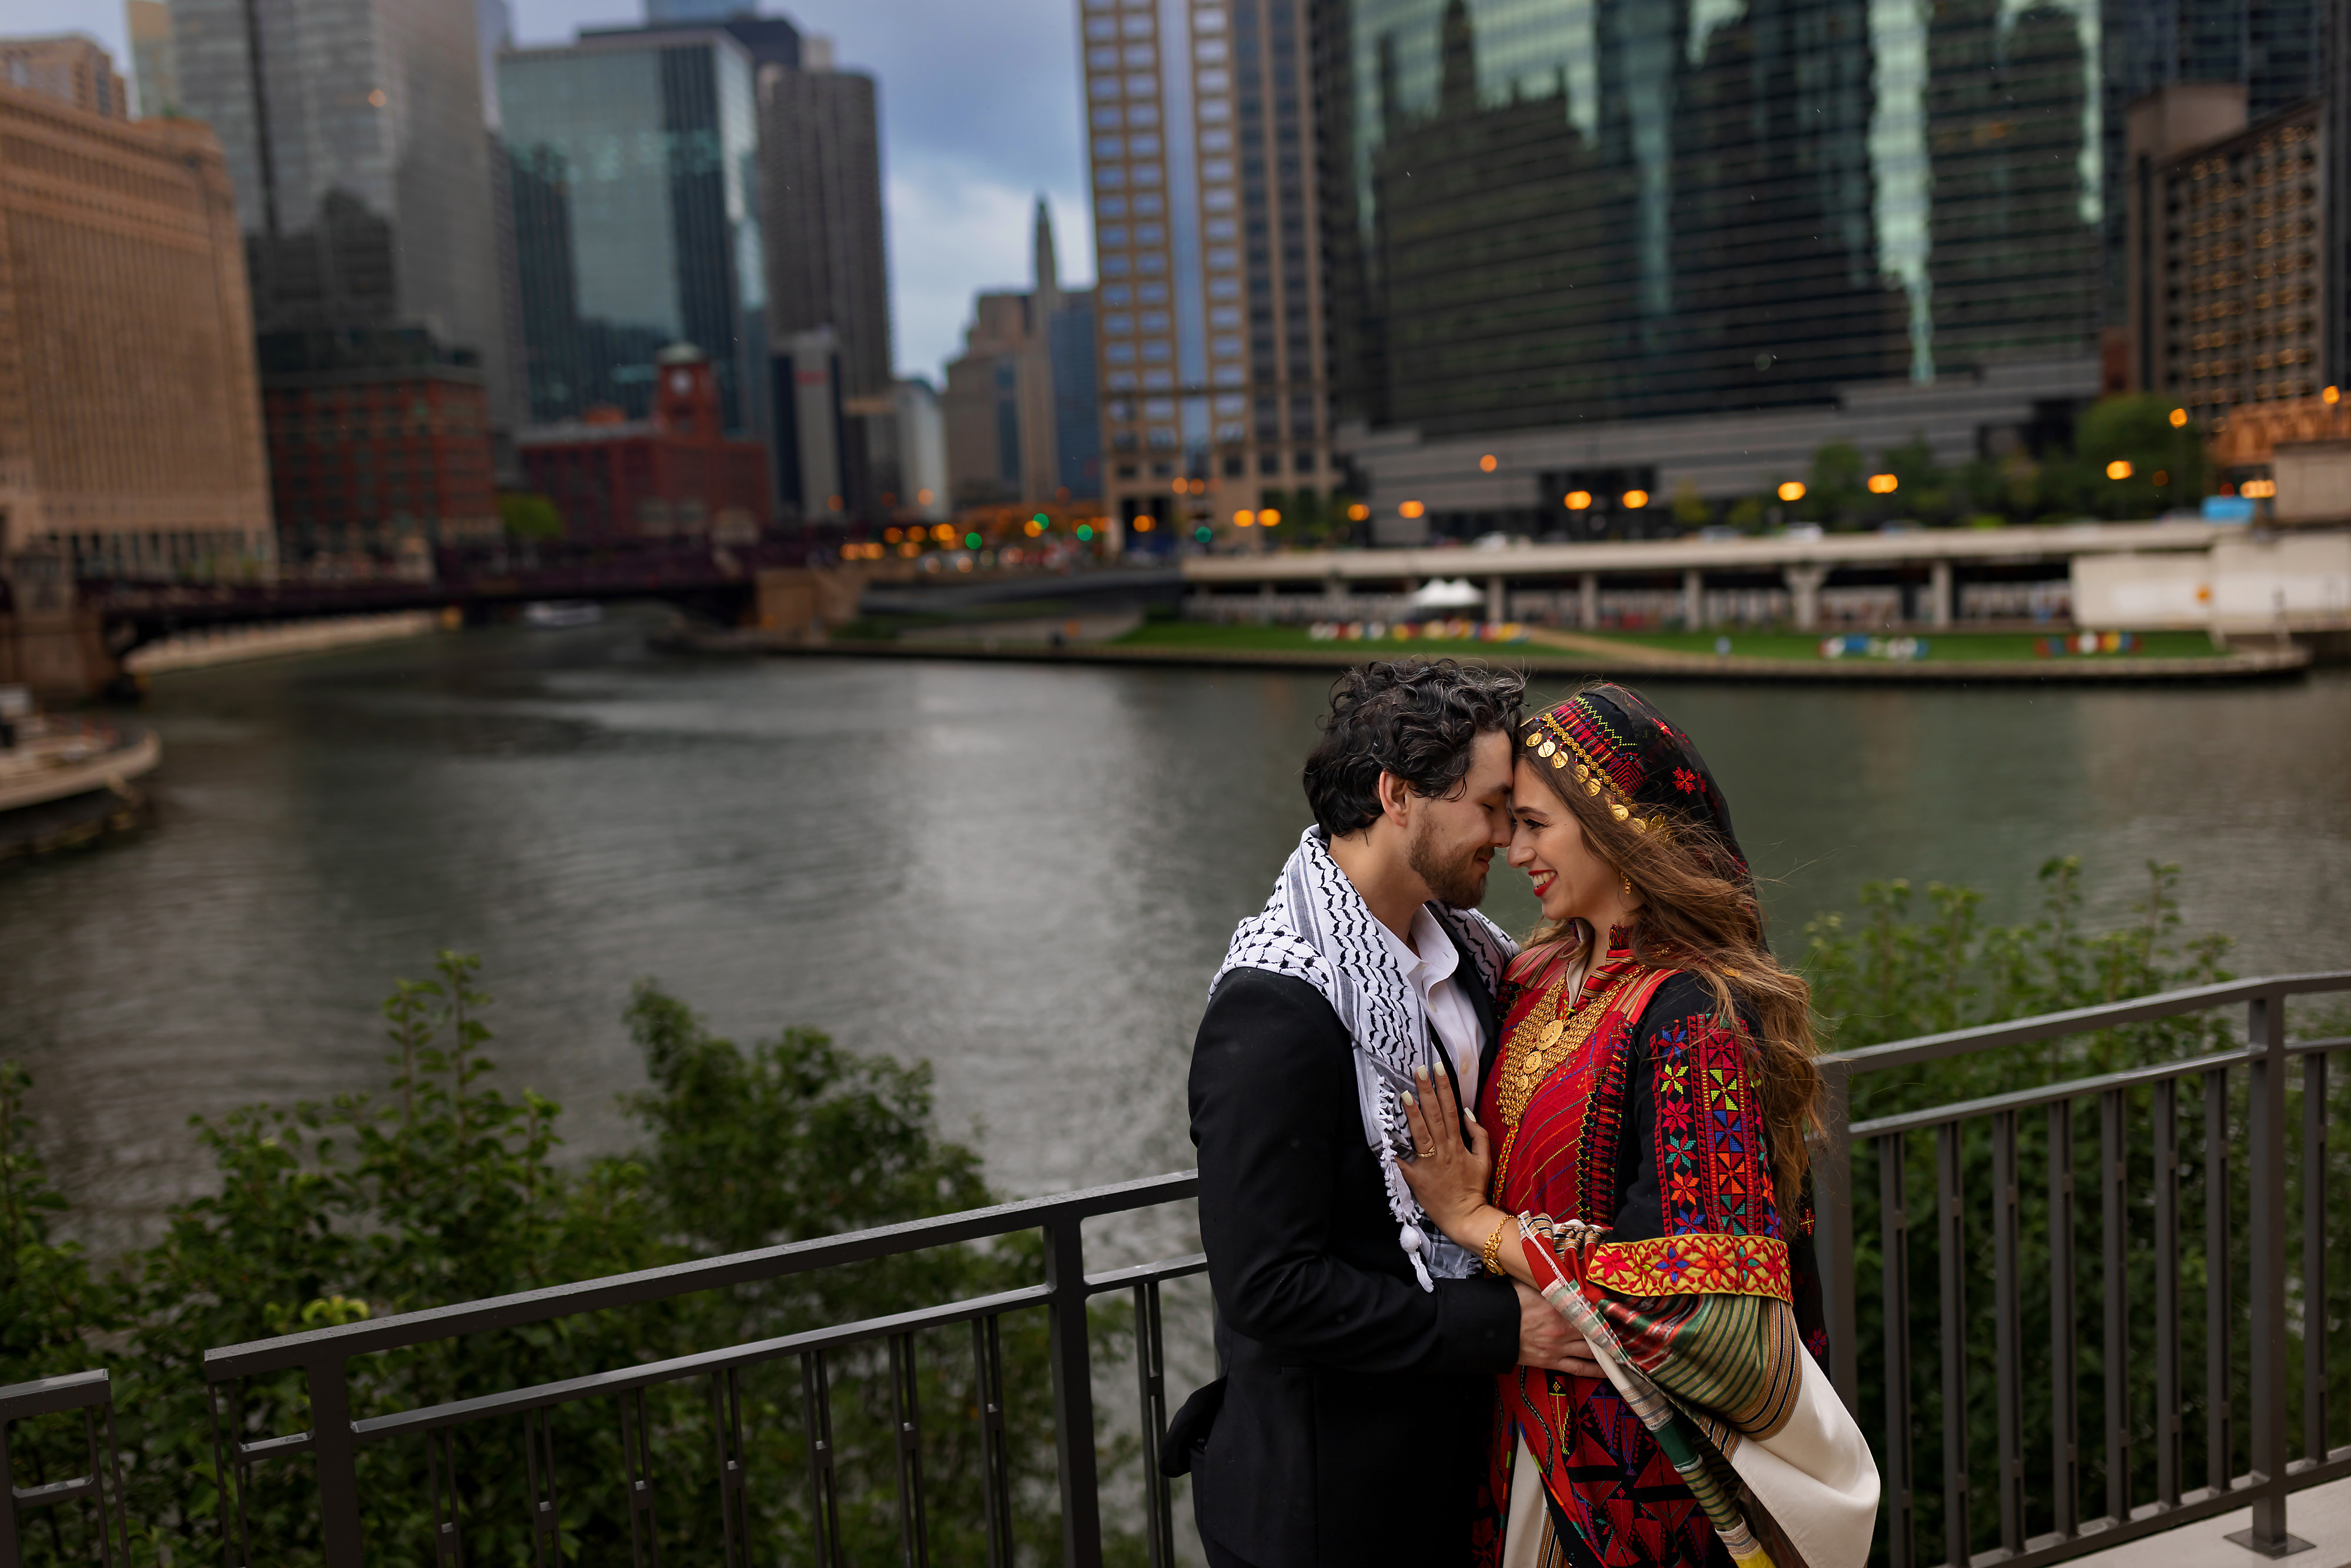 Bride and groom pose for photos near Gibson's Italia Plaza Riverwalk with the Chicago skyline and river in the background